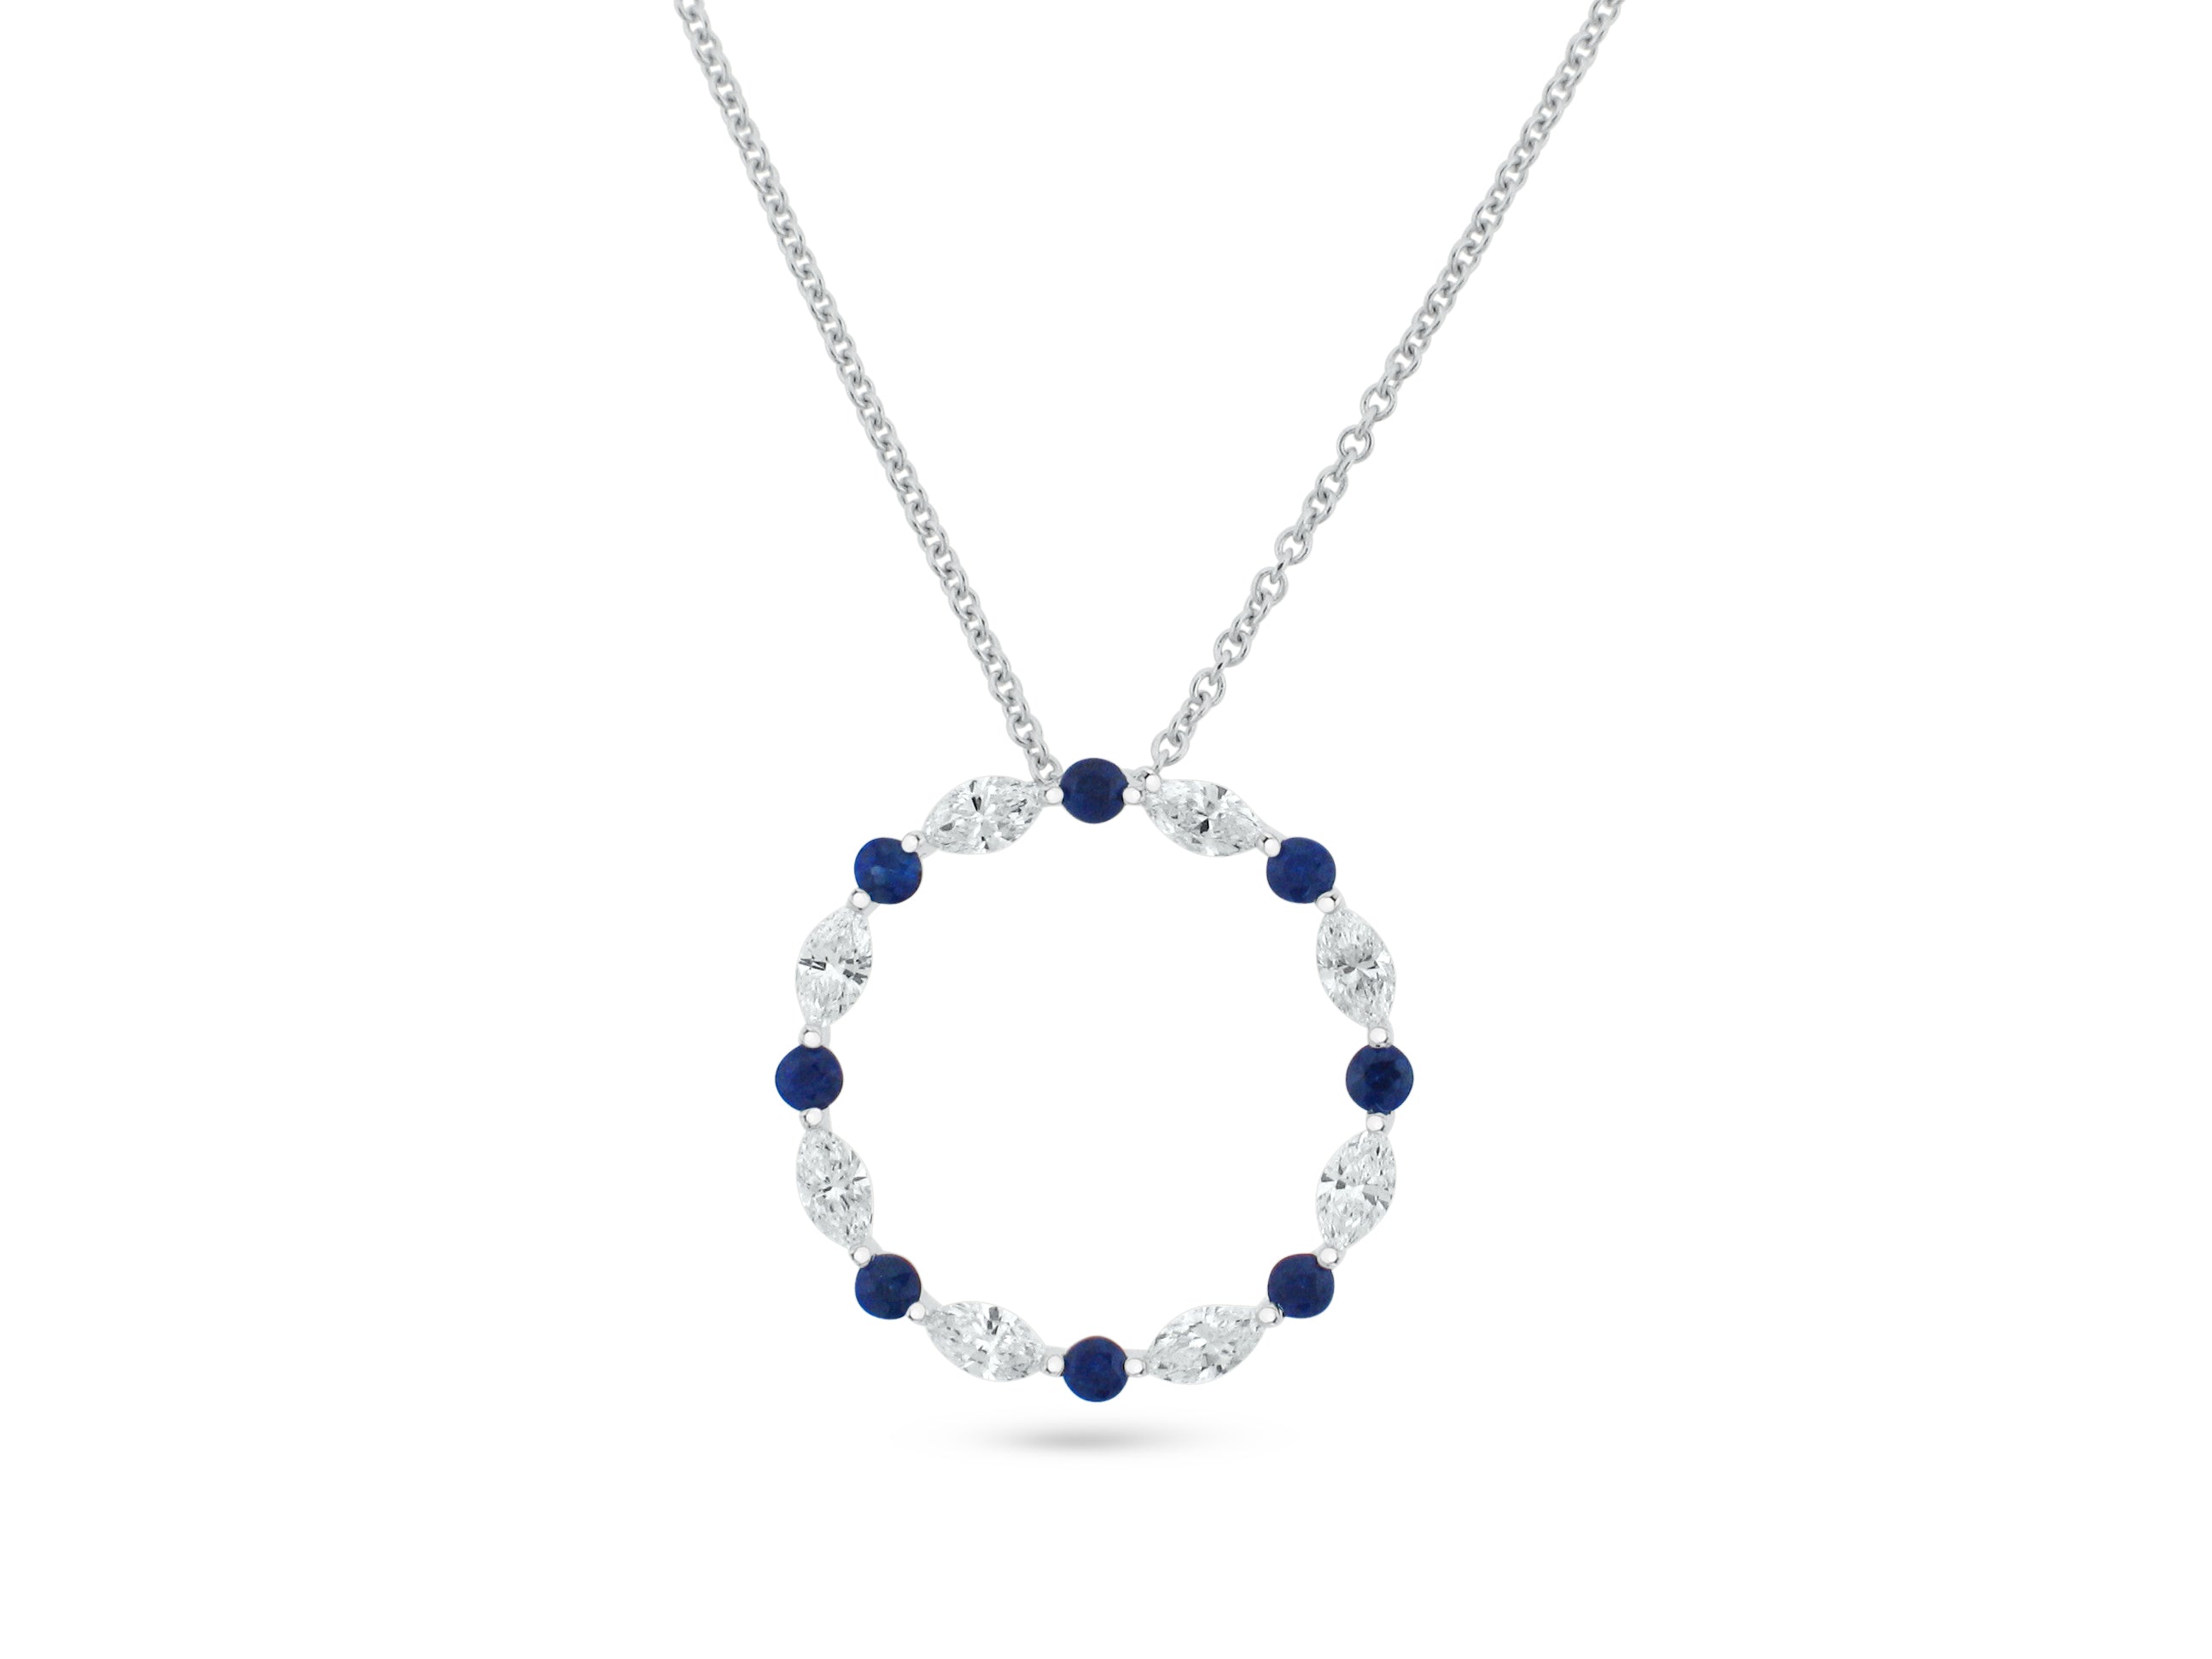 MULLOYS PRIVE18K WHITE GOLD  .68CT VS1-2 CLARITY G COLOR.43CT A+ SAPPHIRE INCLUDING CHAIN